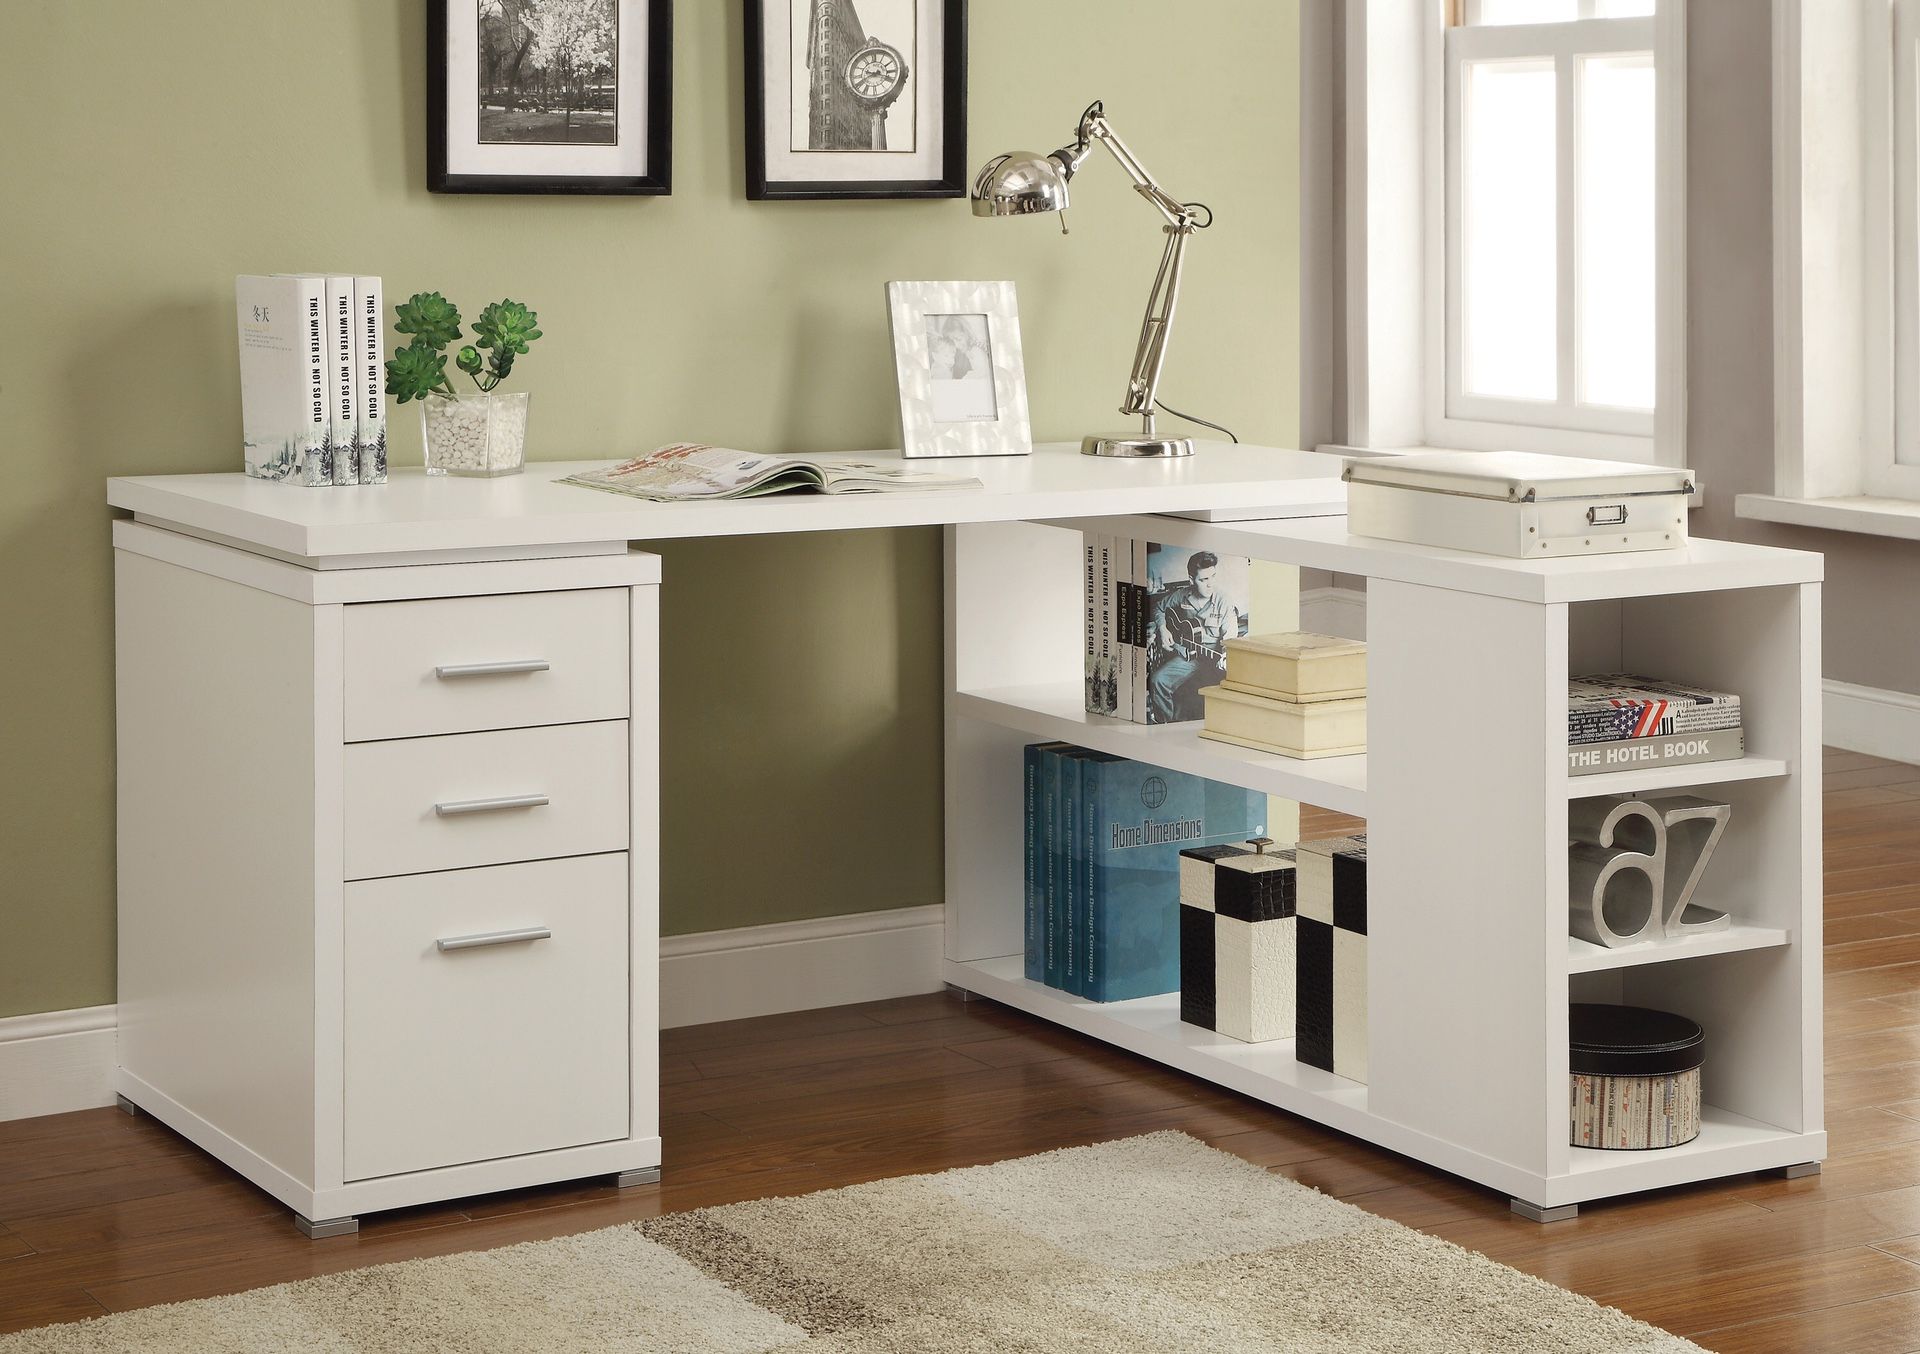 L-Shaped Desk in White Wood $299- SALE! Best Prices!